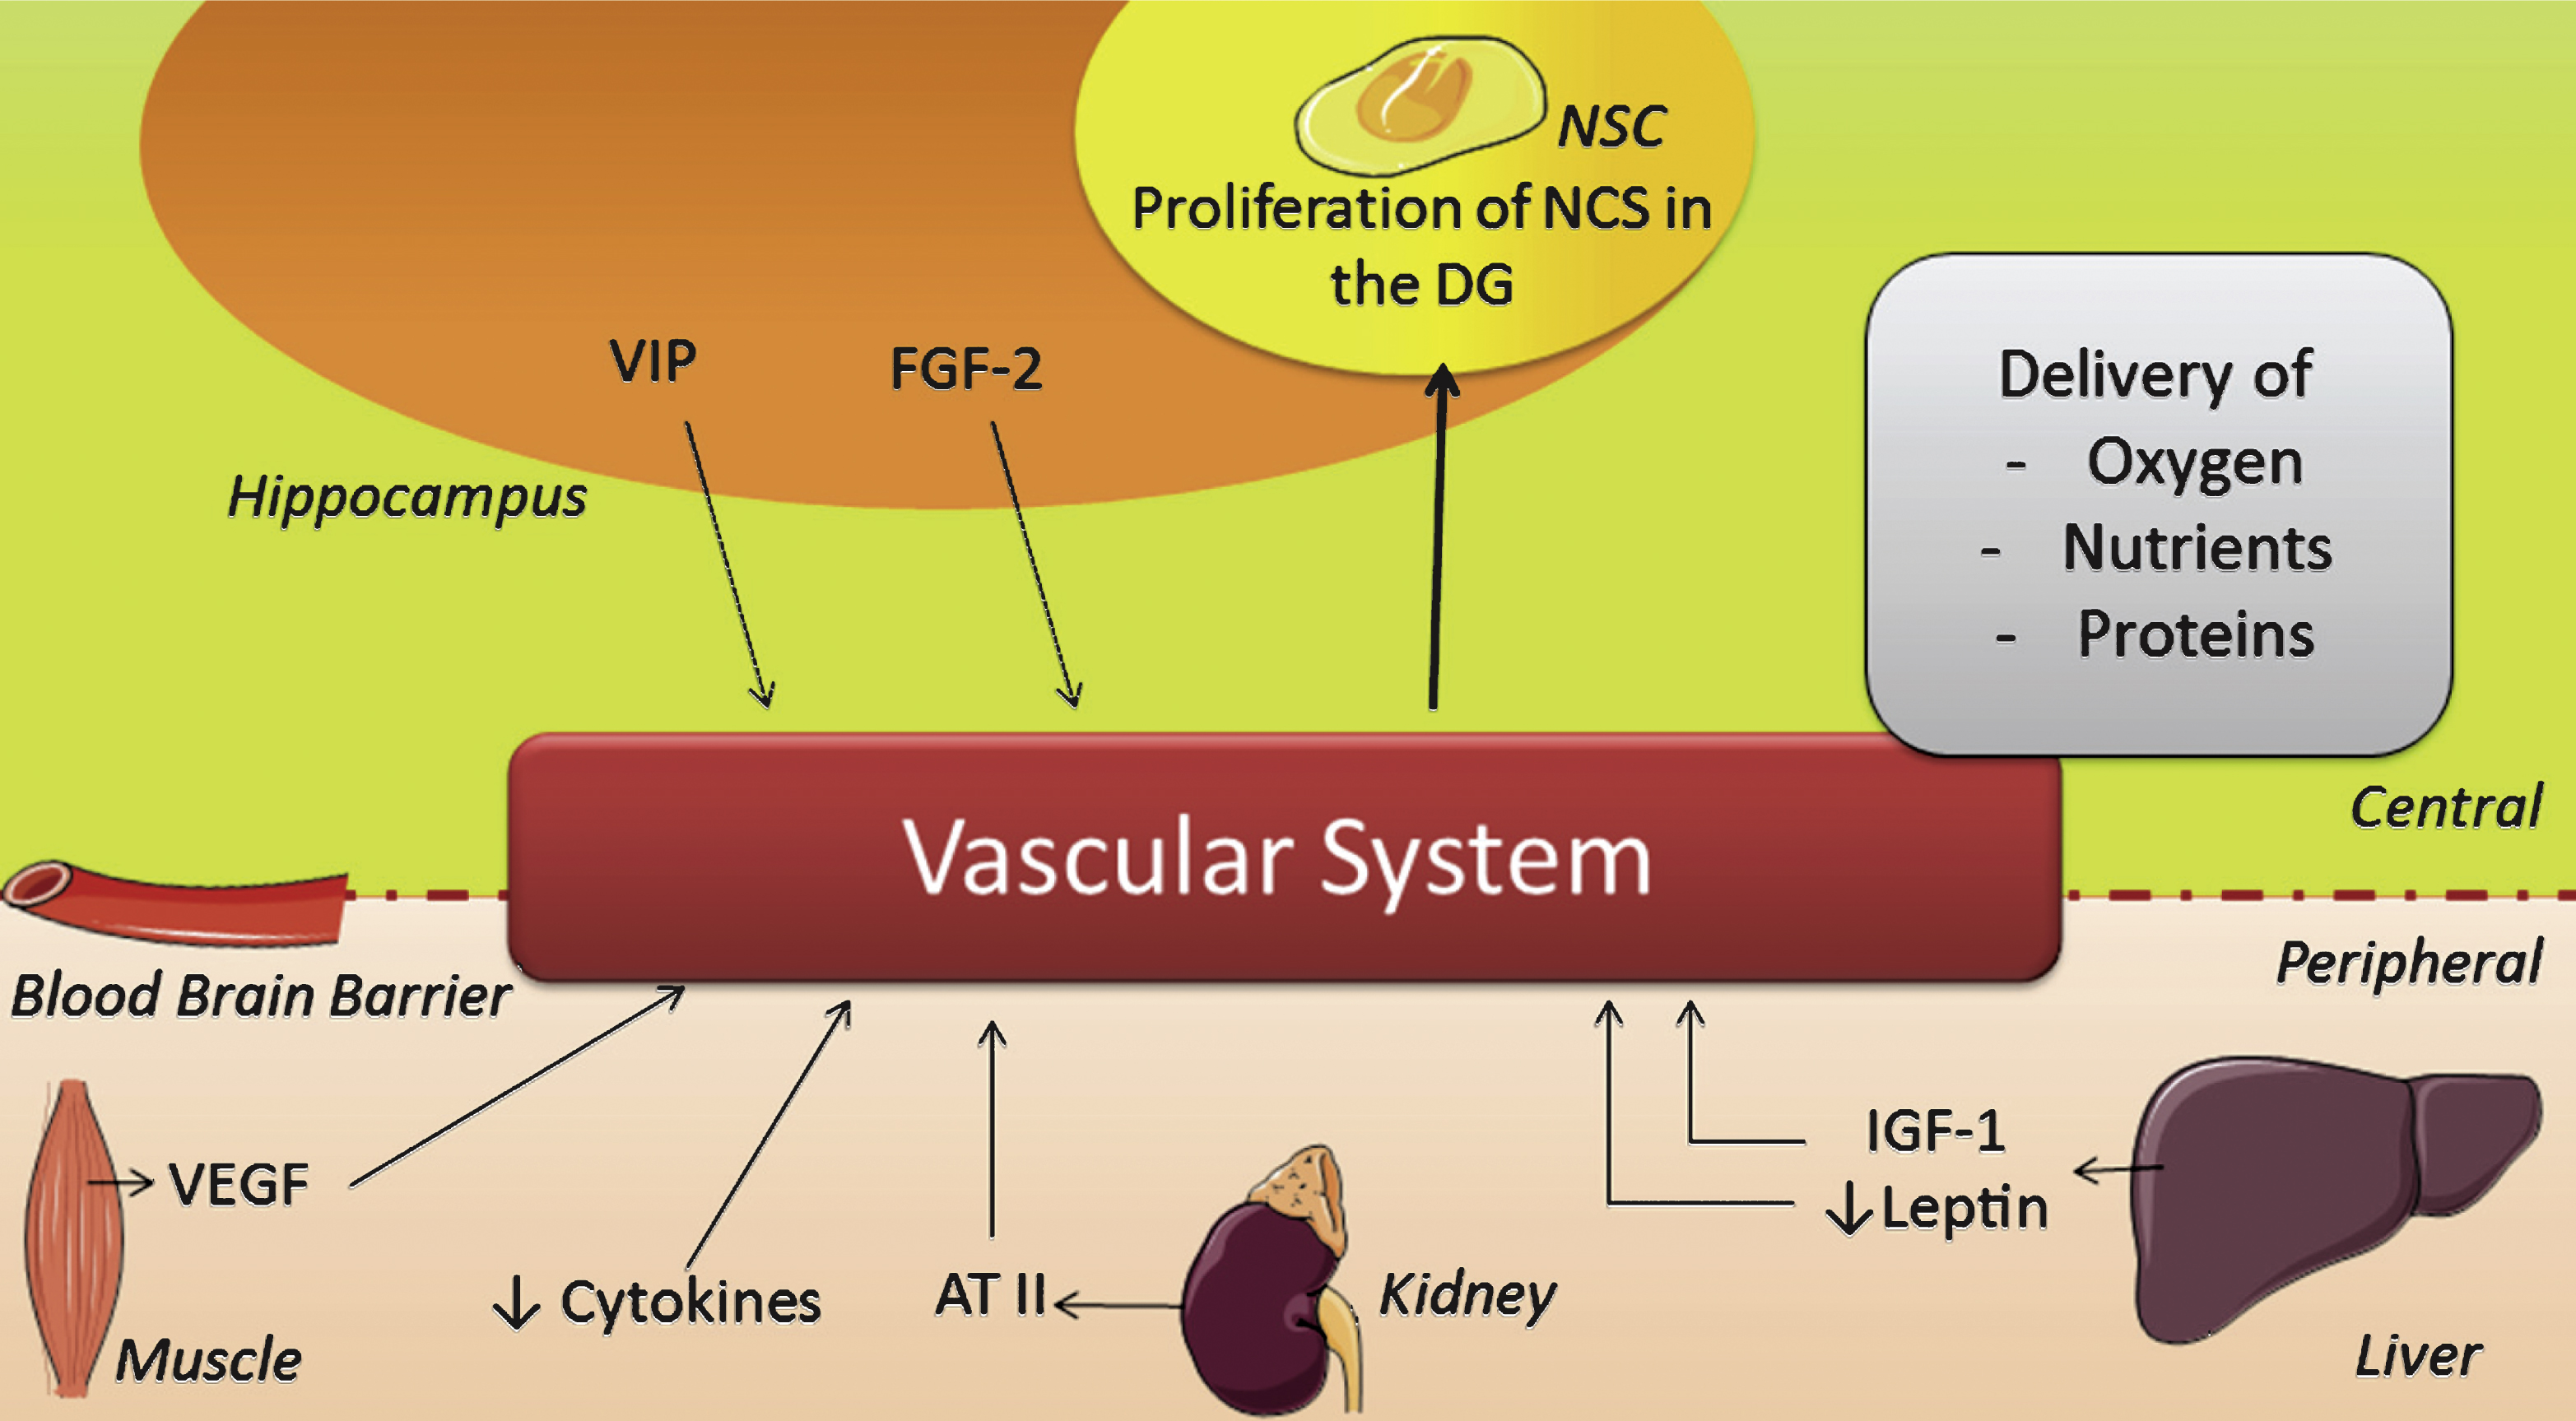 Scheme illustrating the changes induced by physical activity on the vascular system. AT II = angiotensin II; FGF-2 = fibroblast growth factor 2; IGF-1 = insulin-like growth factor 1; NSC = neuronal stem cell; VEGF = vascular endothelial growth factor; VIP = vasoactive intestinal peptide.